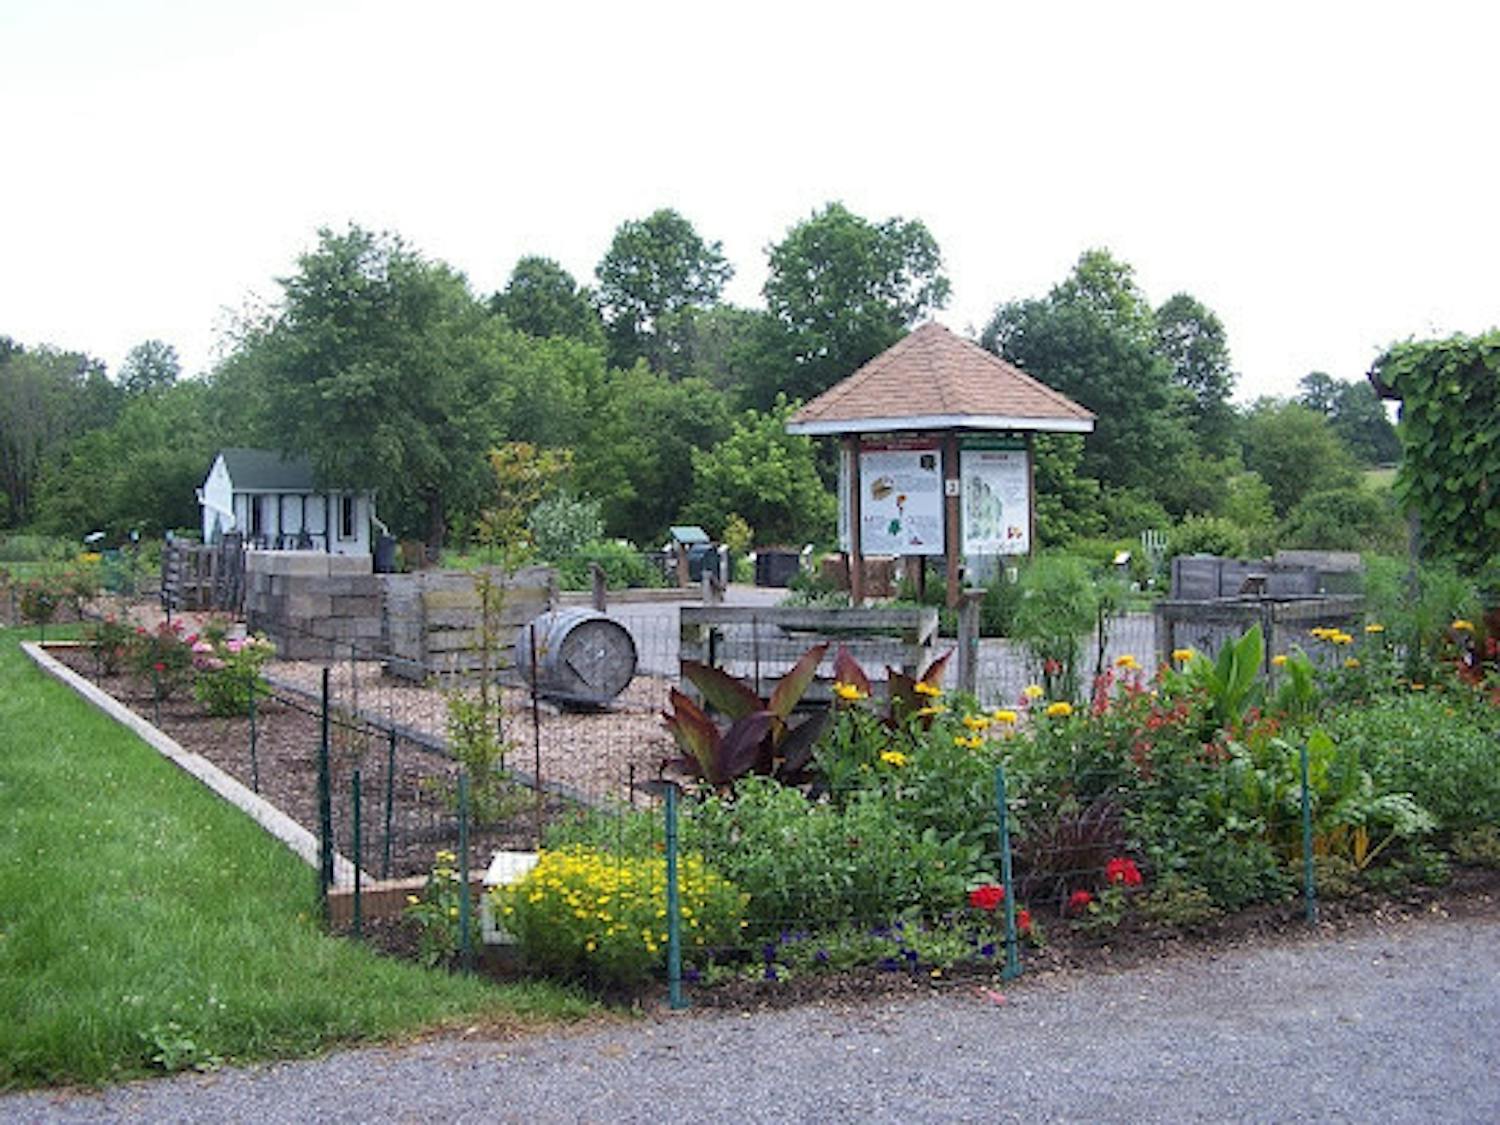 Pictured above are the compost bins at Mercer County Educational Gardens (Photo courtesy of Justine Gray / mgofmc.org).